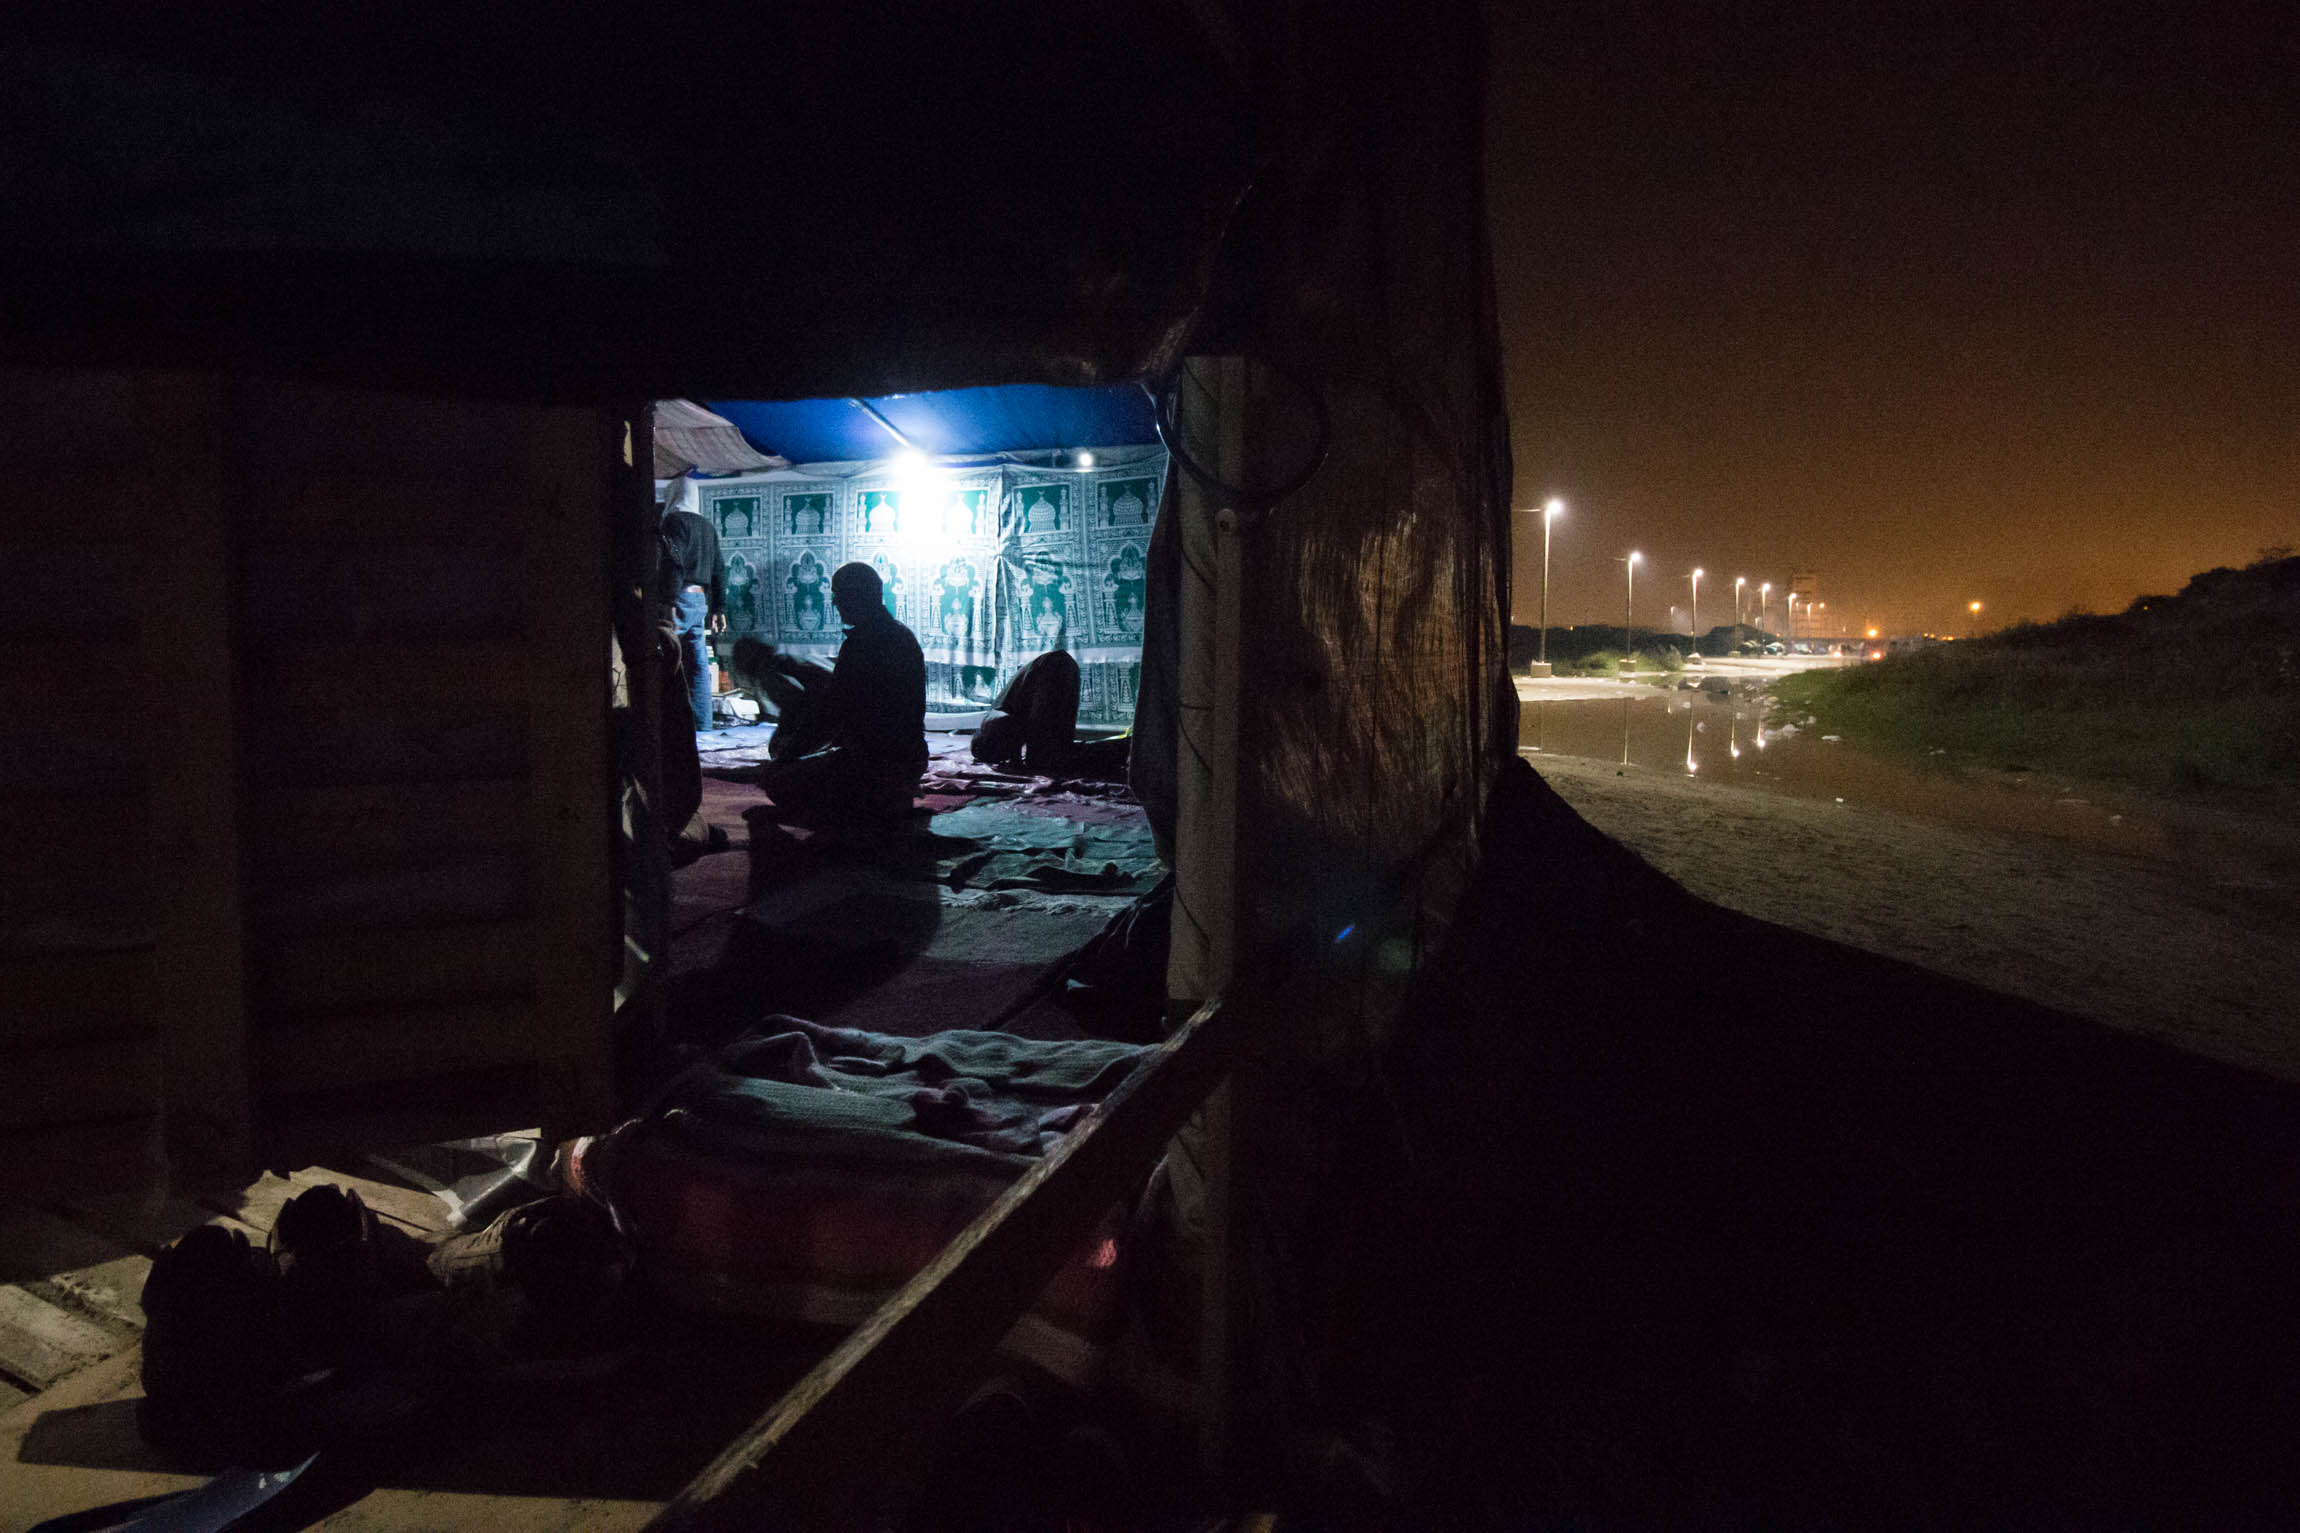 Men pray after sunset in the main mosque at the "New Jungle" refugee camp in Calais, France, Sunday, October 5, 2015.